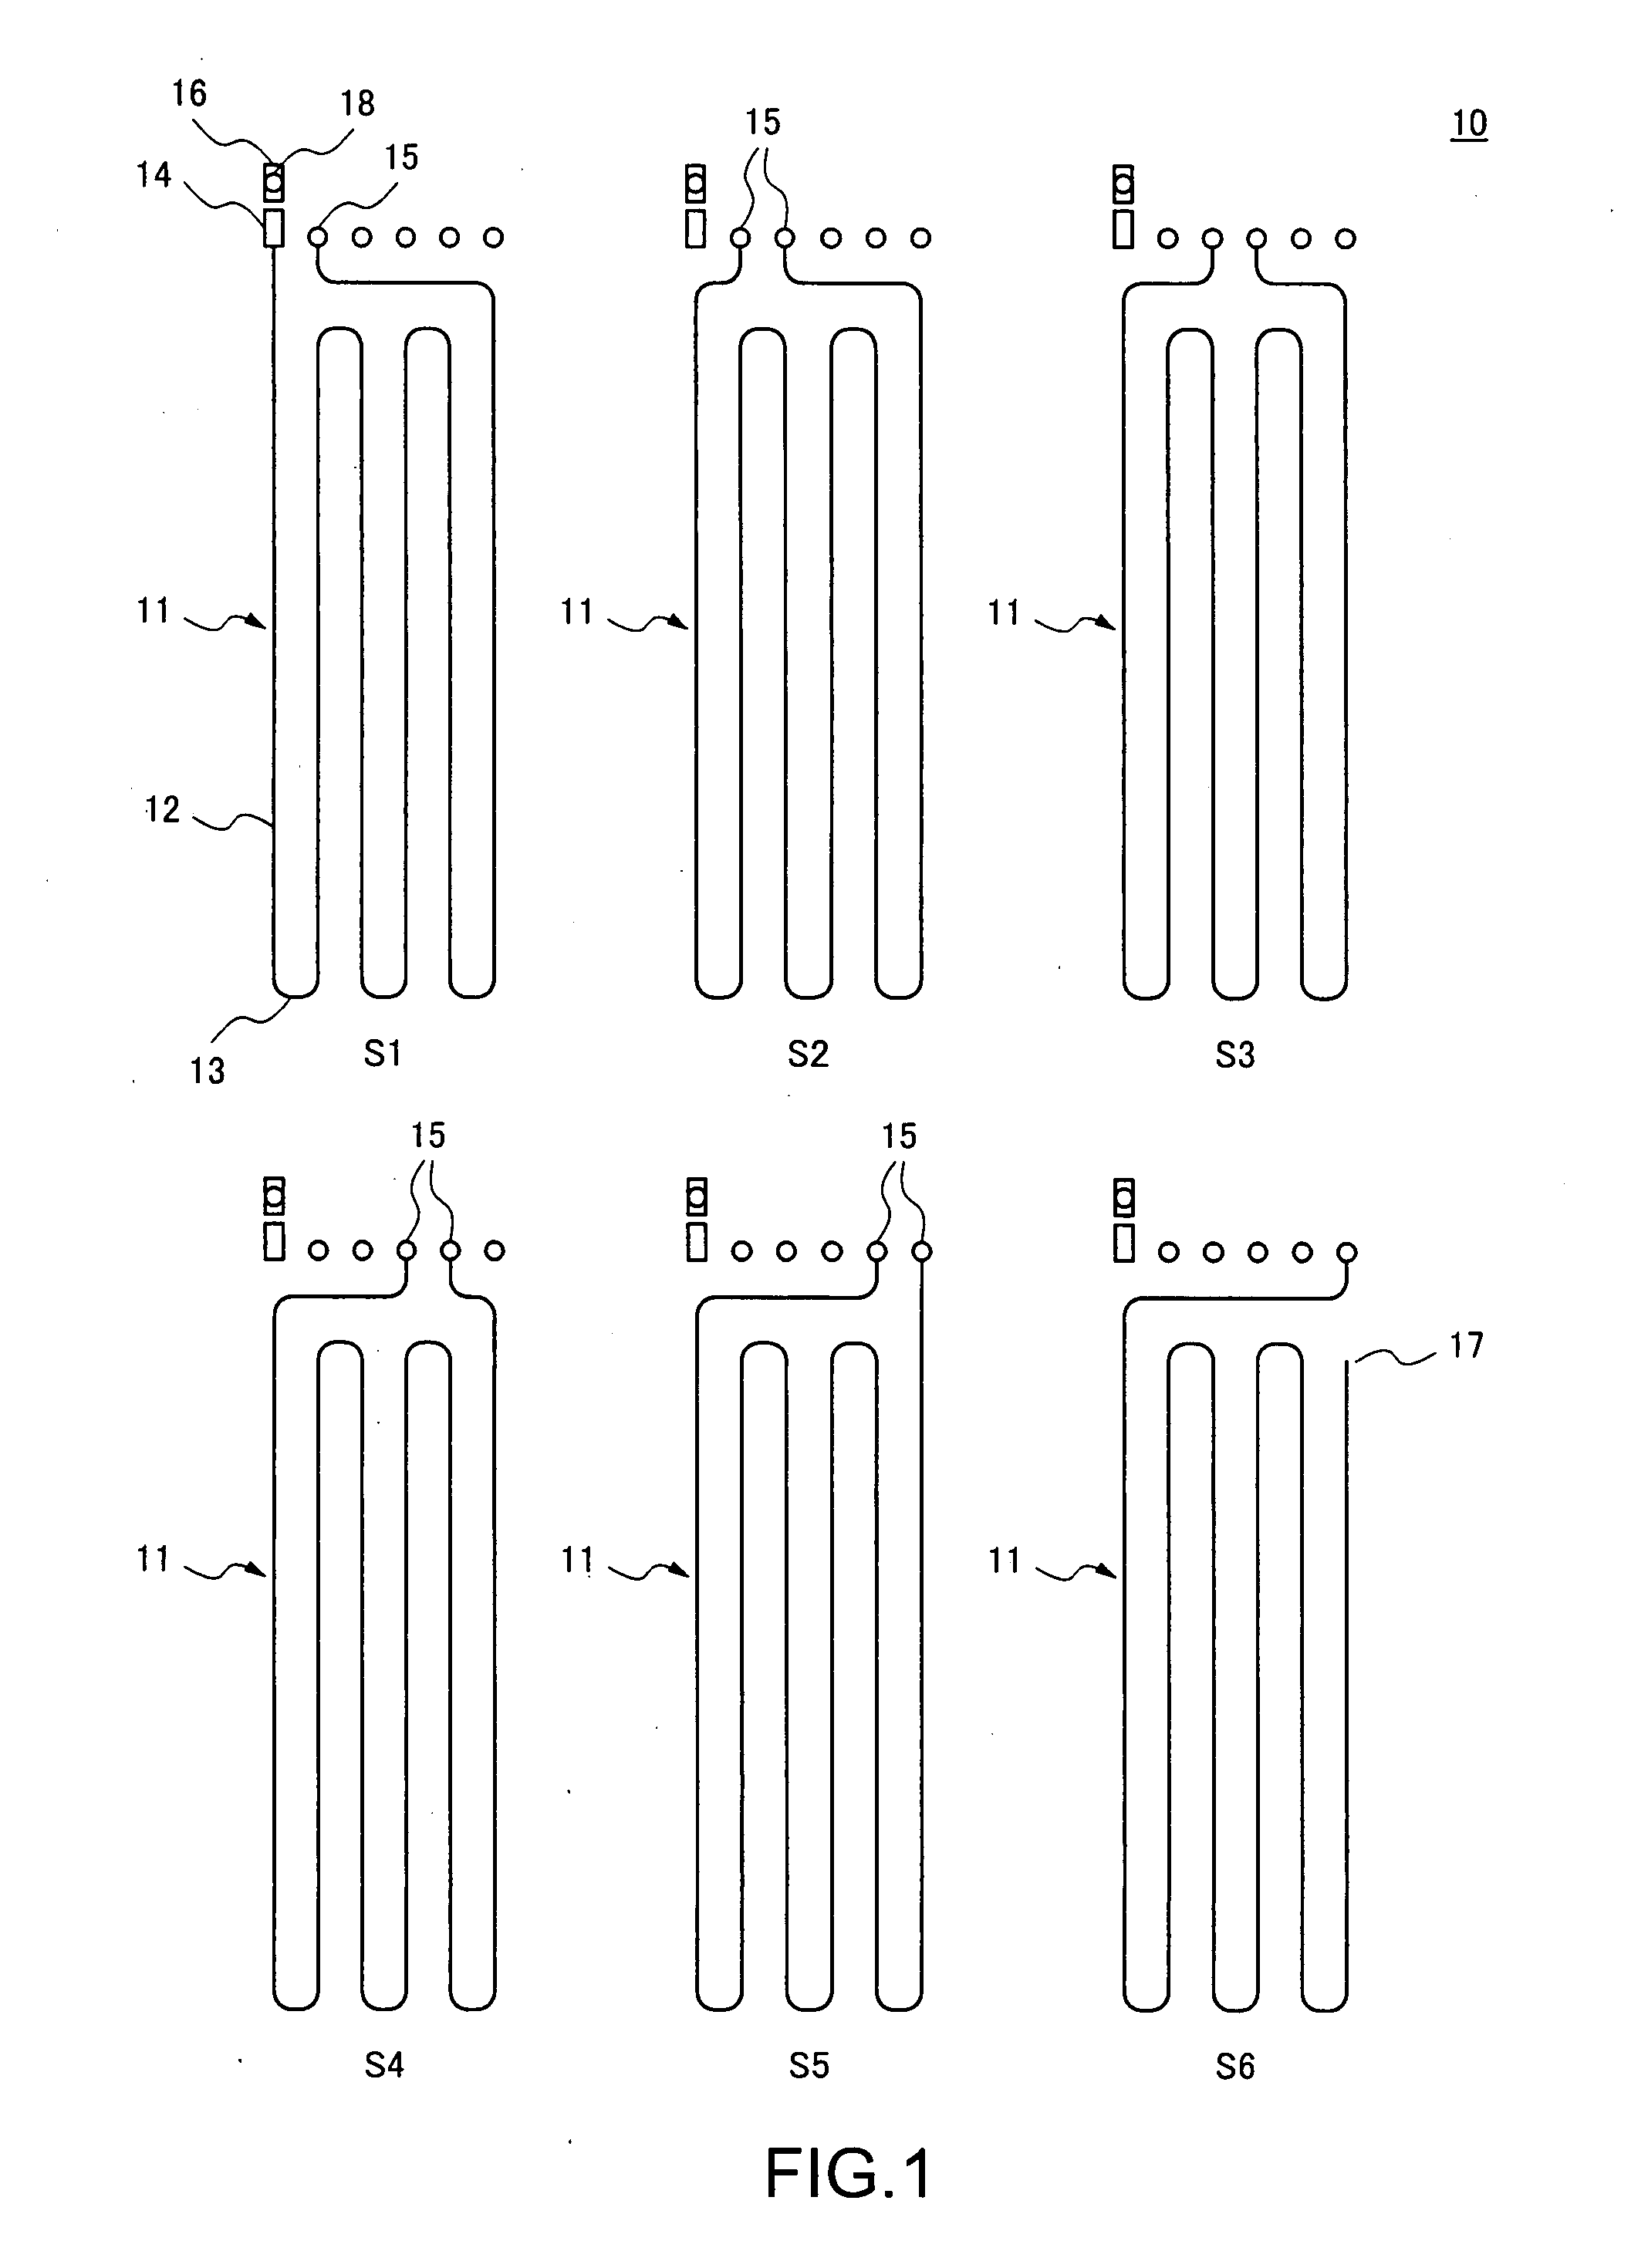 Multilayer printed wiring board and method of measuring characteristic impedance